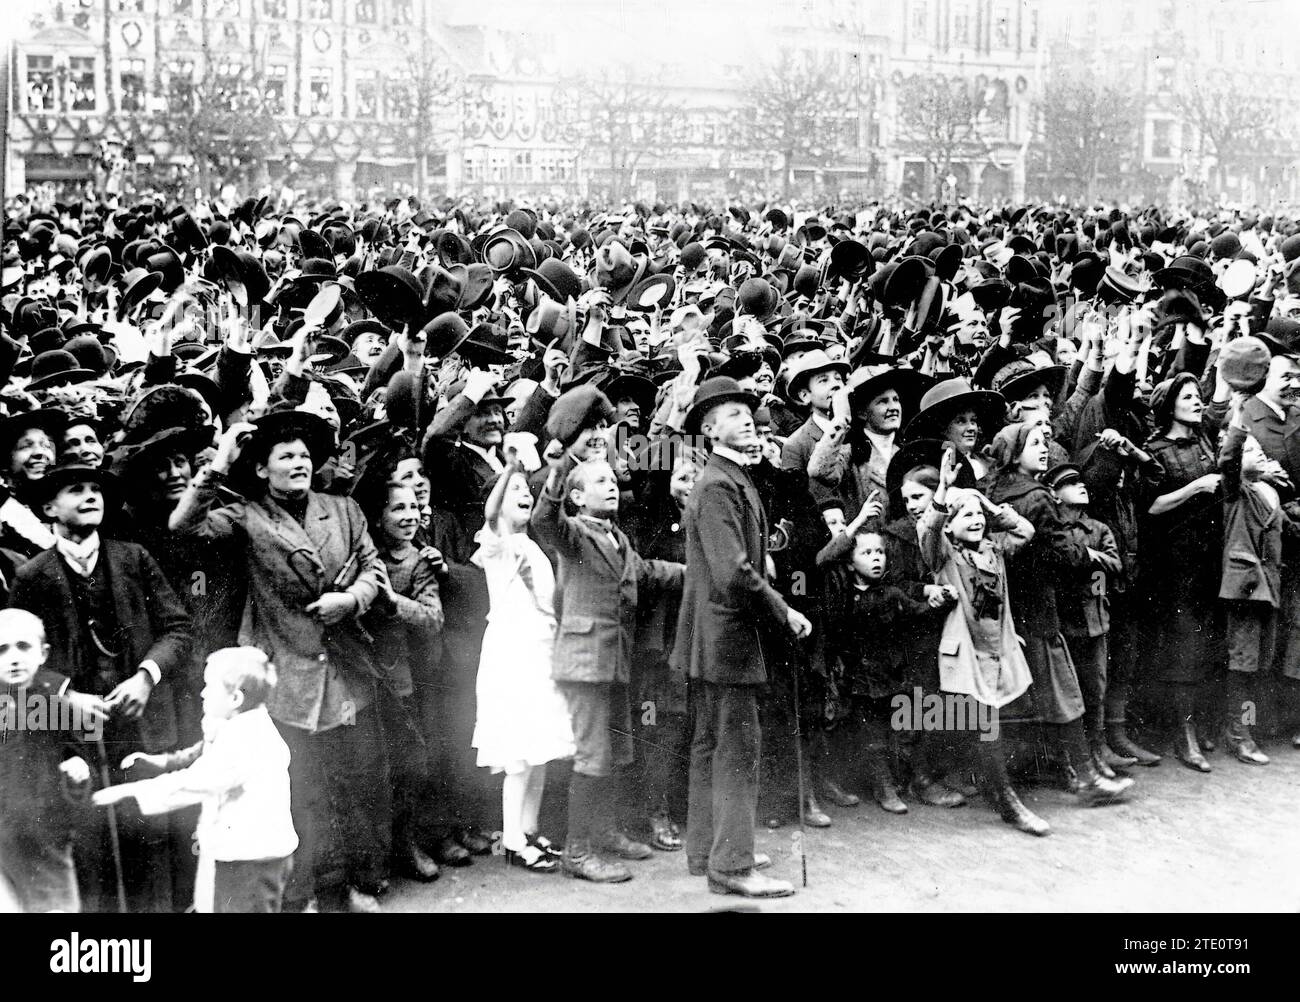 10/31/1913. A manifestation of Sympathy. The Inhabitants of Brunswick Acclaiming Their New Sovereigns on the Day of Their Arrival. Credit: Album / Archivo ABC / Harlingue Stock Photo